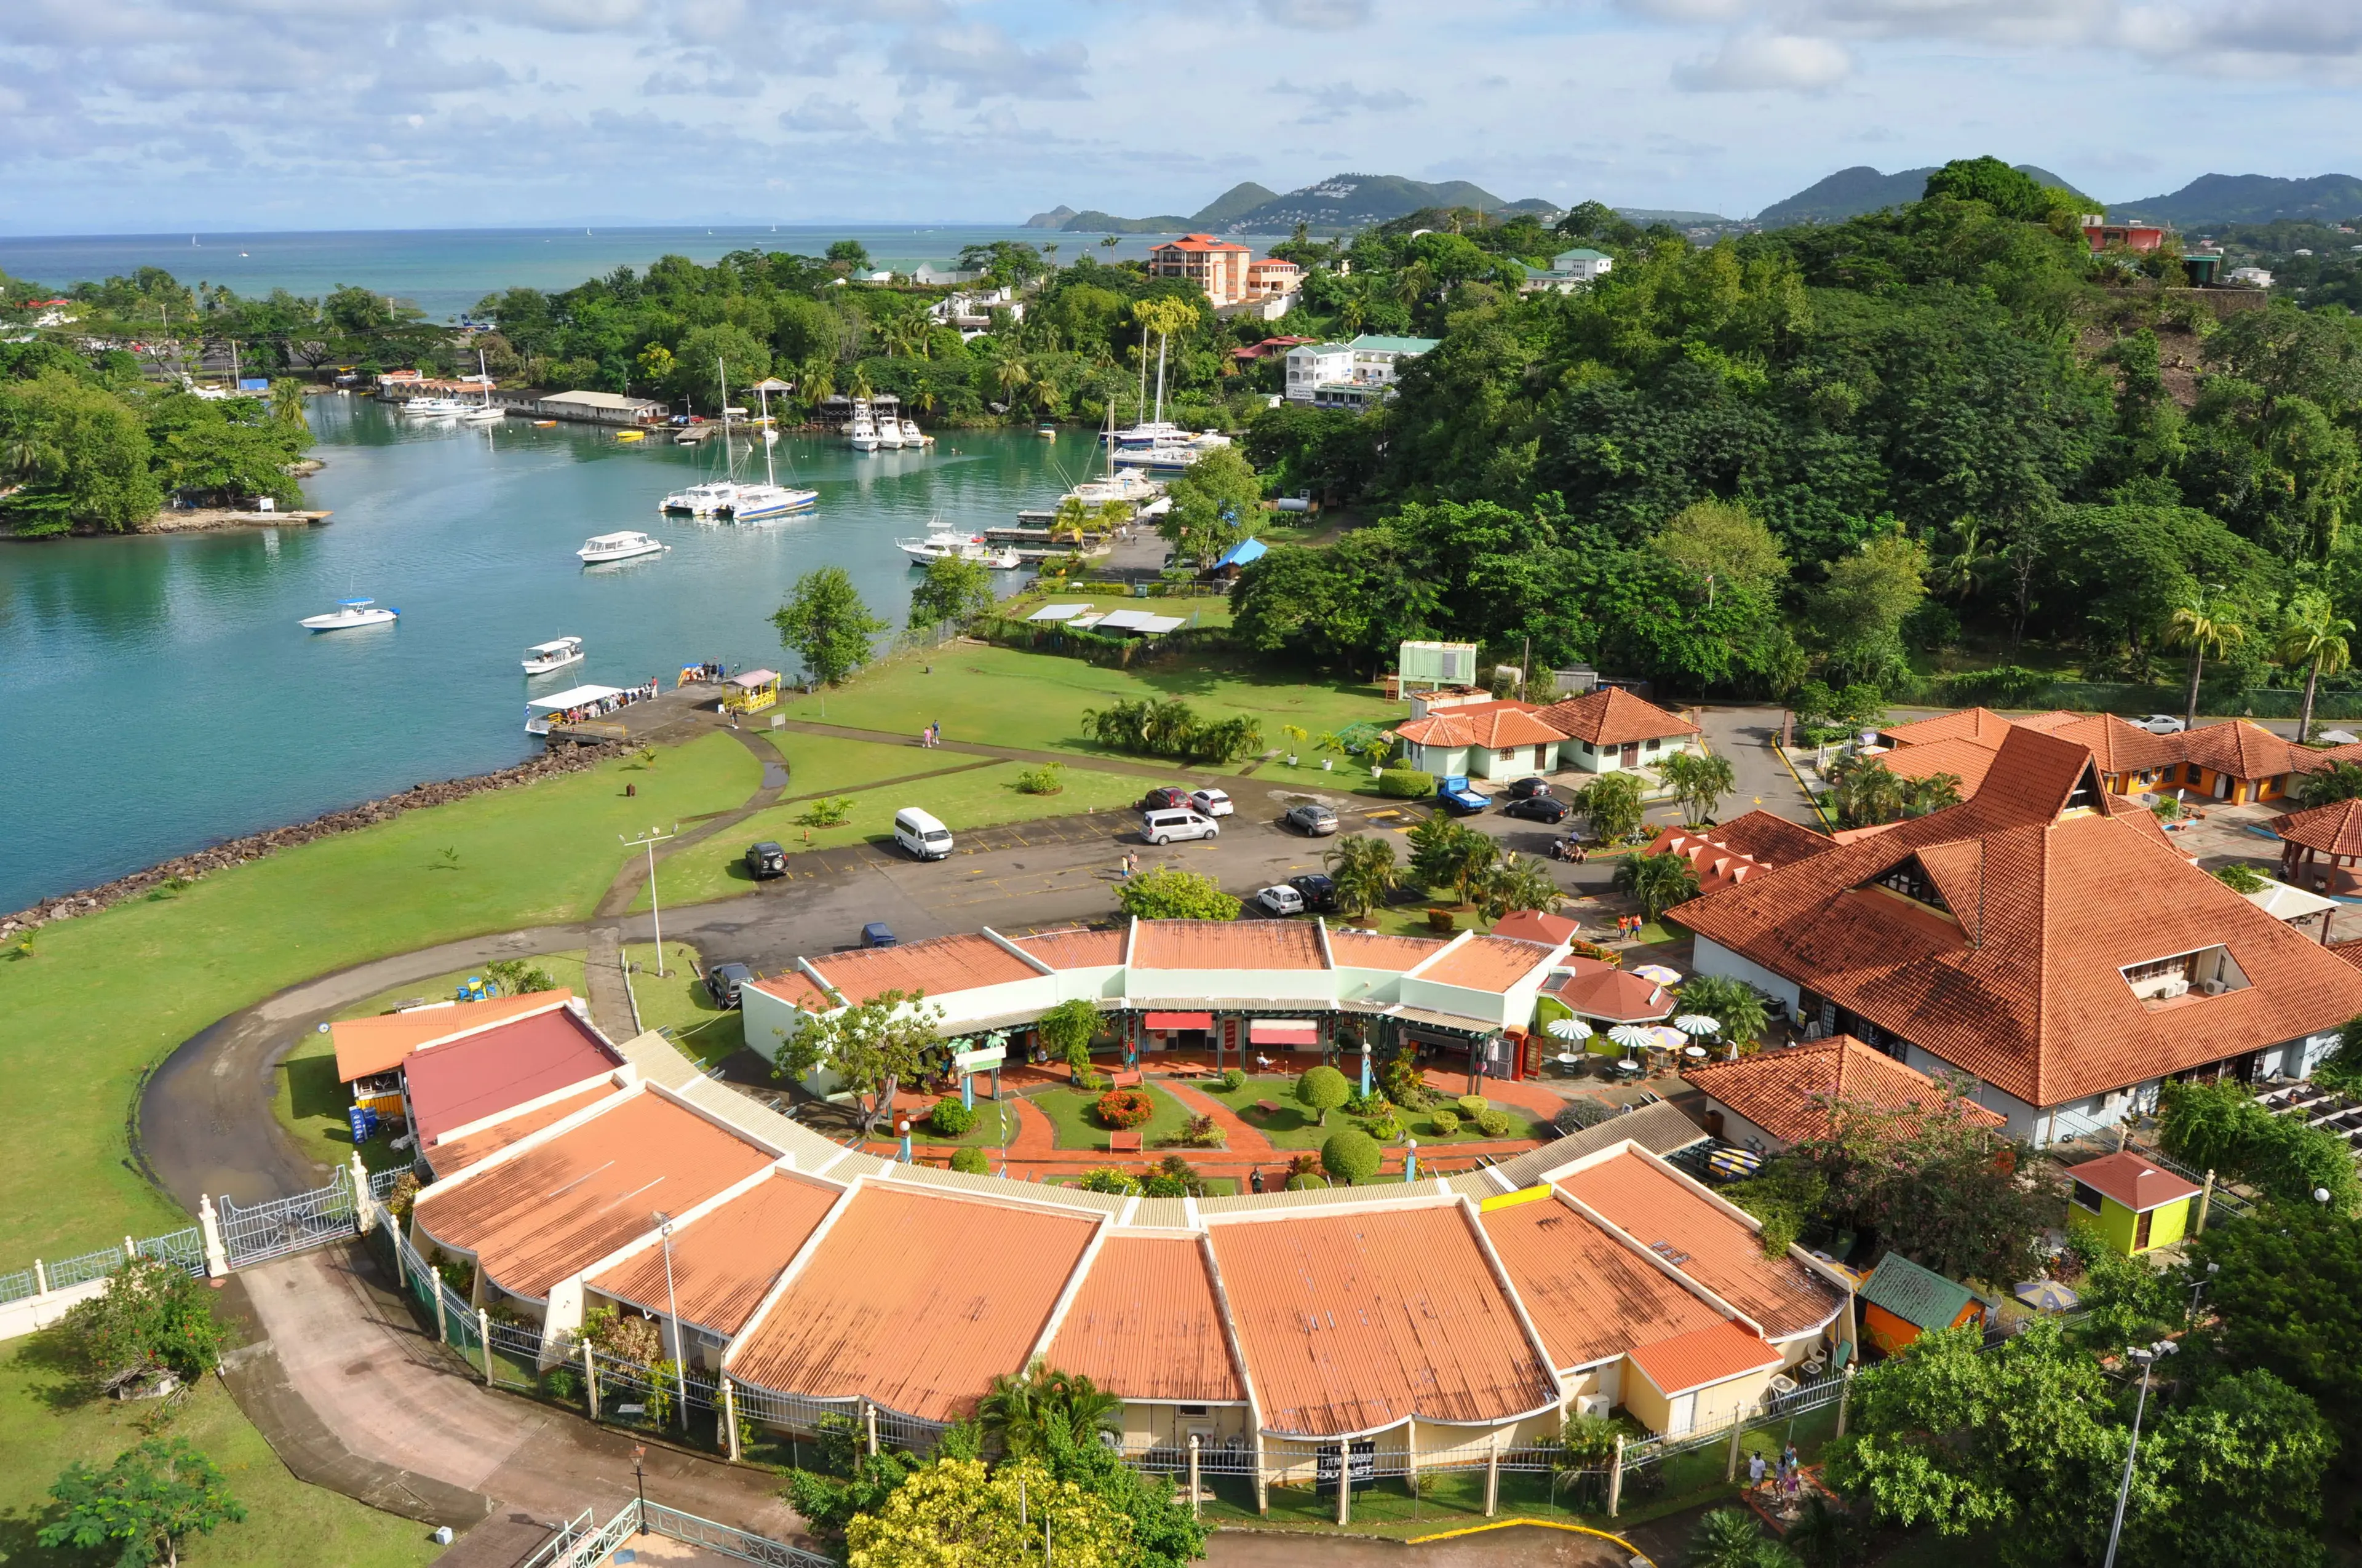 3-Day Offbeat Family Adventure & Relaxation in Saint Lucia